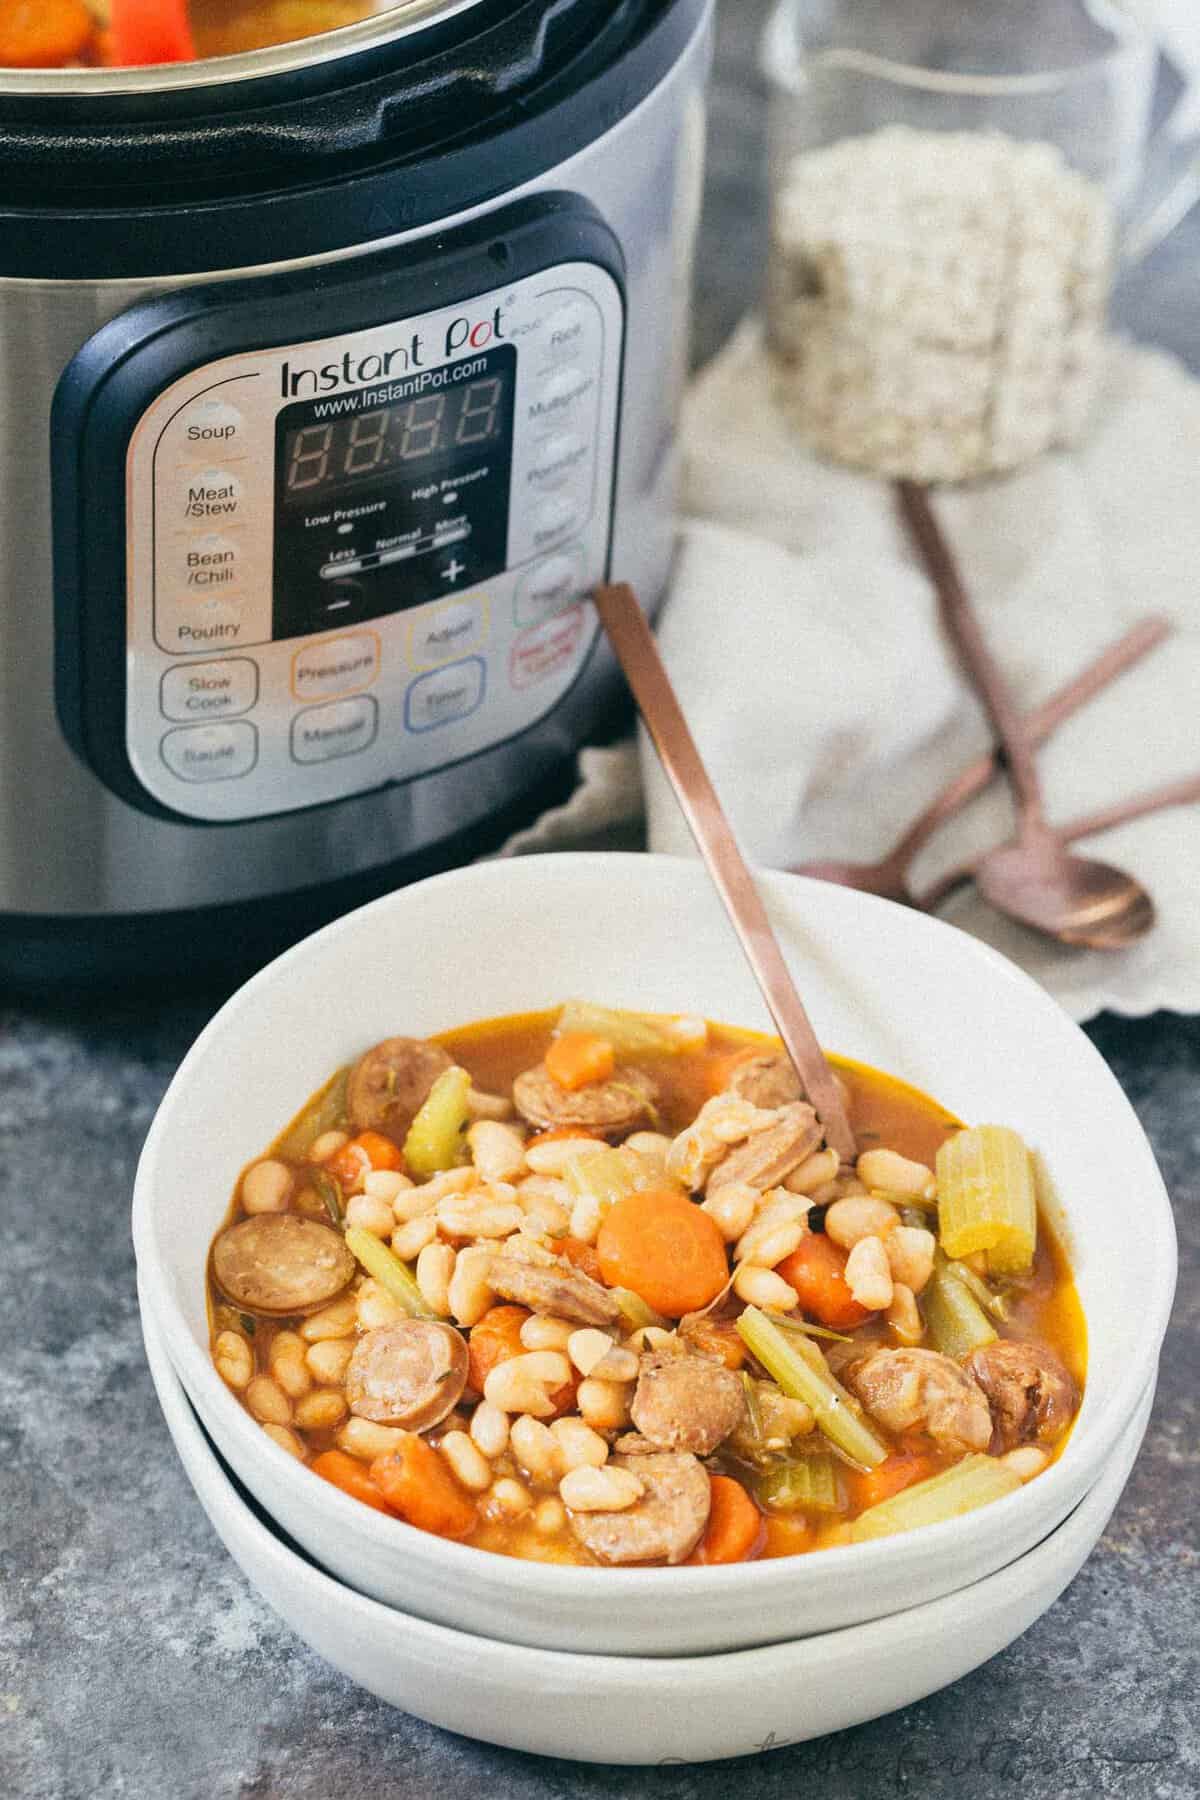 A deliciously flavorful herbed white bean and sausage soup that requires no beans to be soaked! This will be a new Instant Pot favorite!